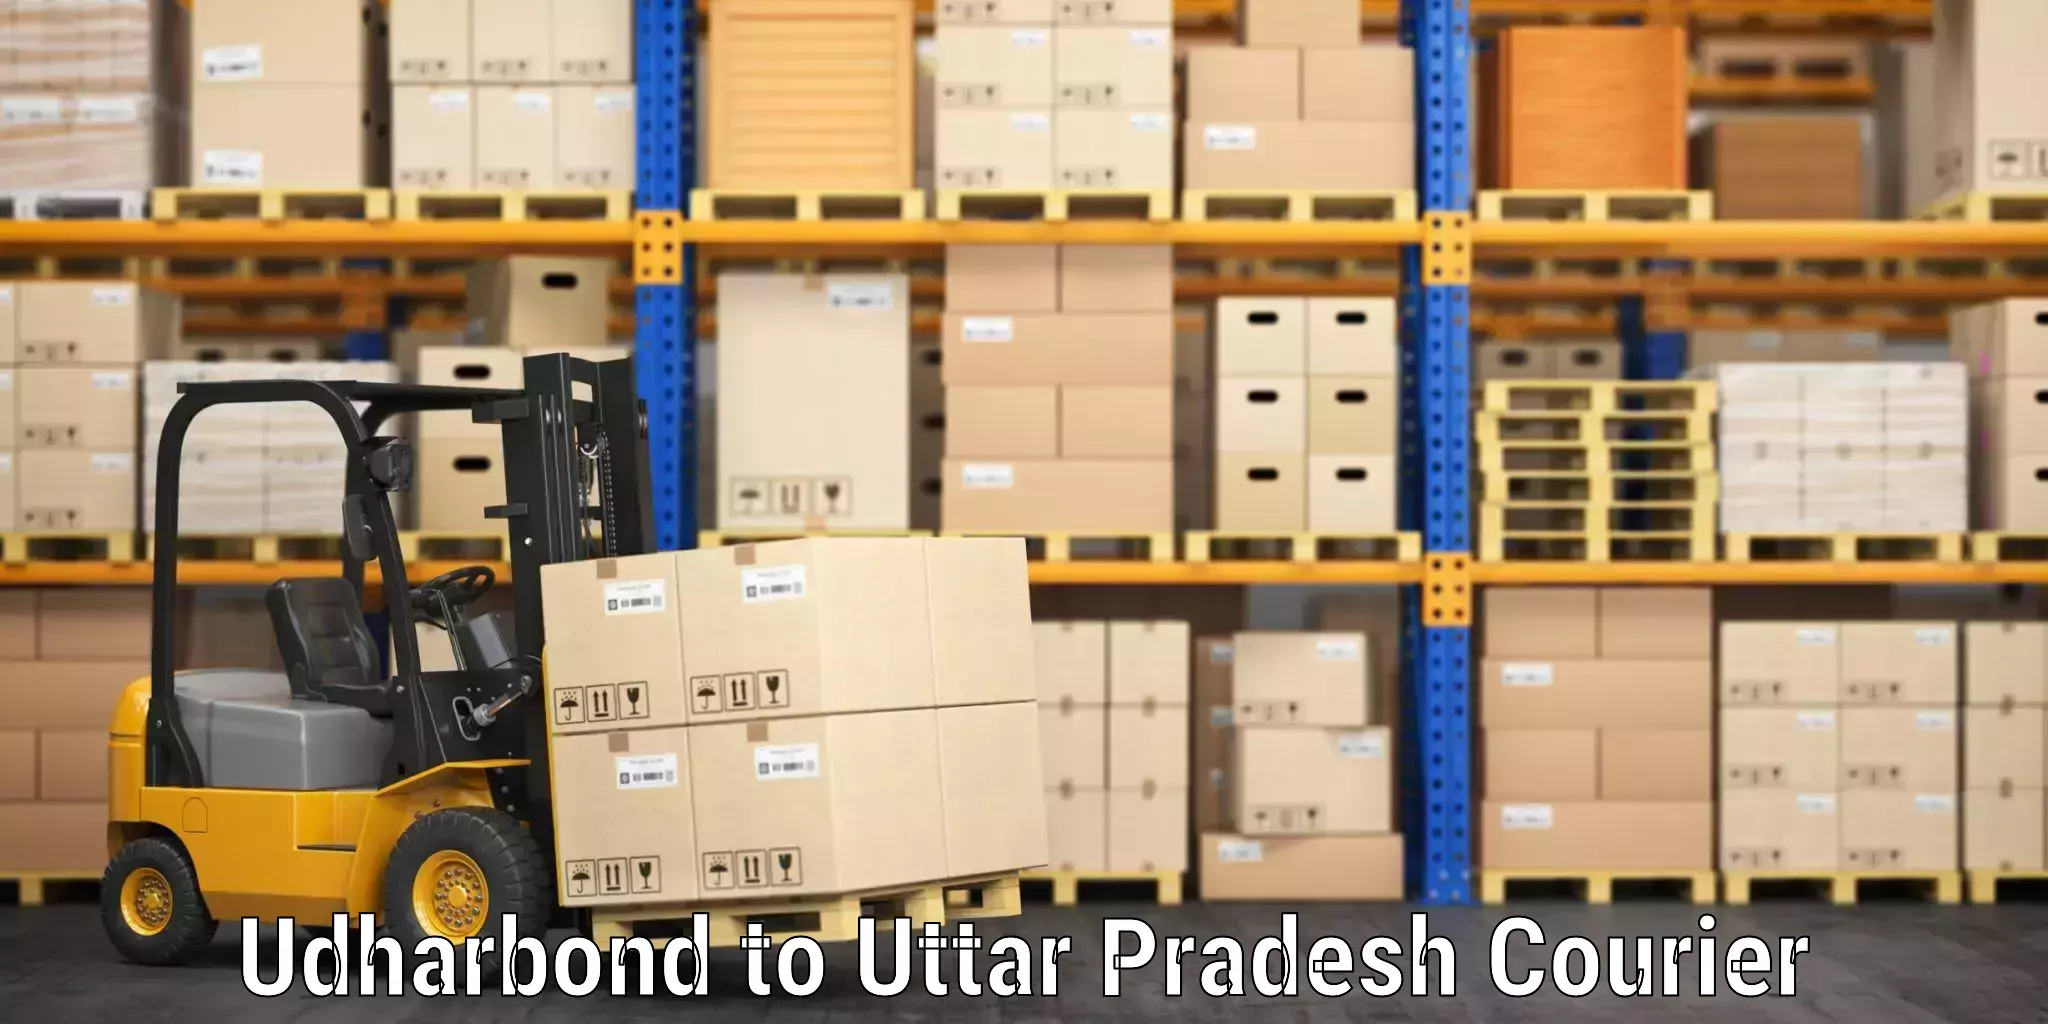 Holiday season luggage delivery Udharbond to Fatehabad Agra